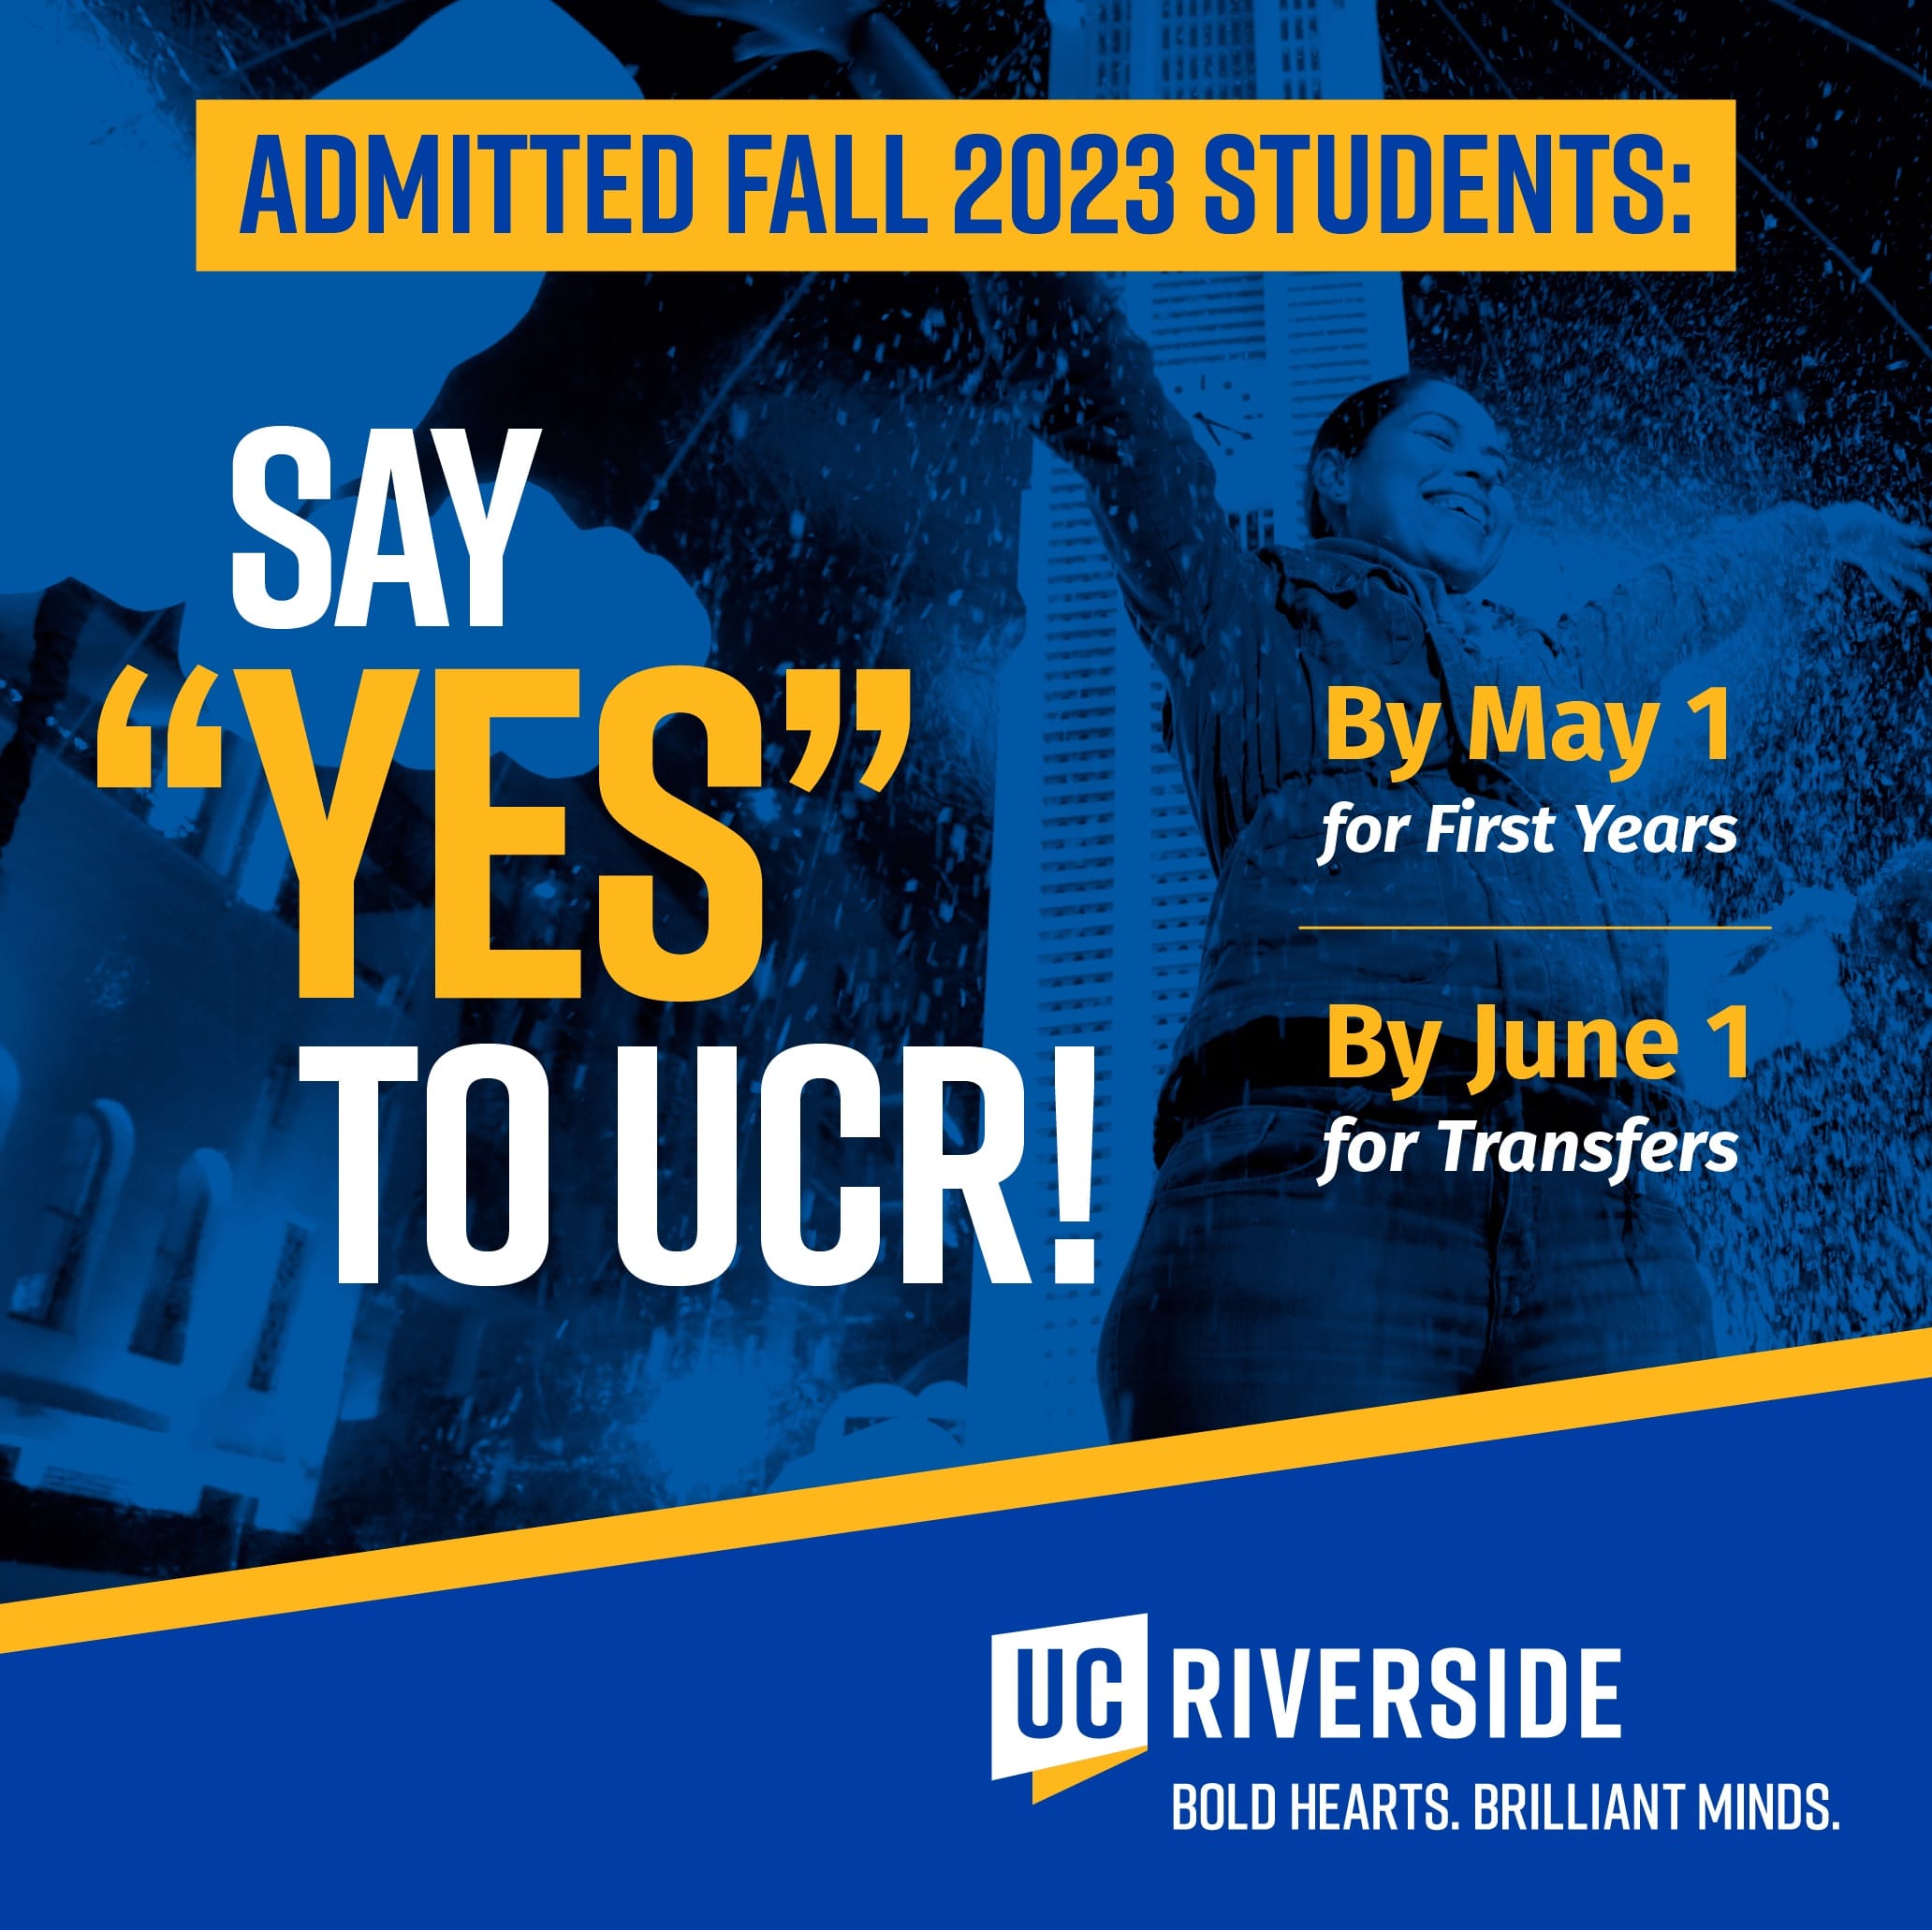 Admitted Fall 2023 Students: Say "YES" to UCR! By May 1 for First Years, By June 1 for Transfers